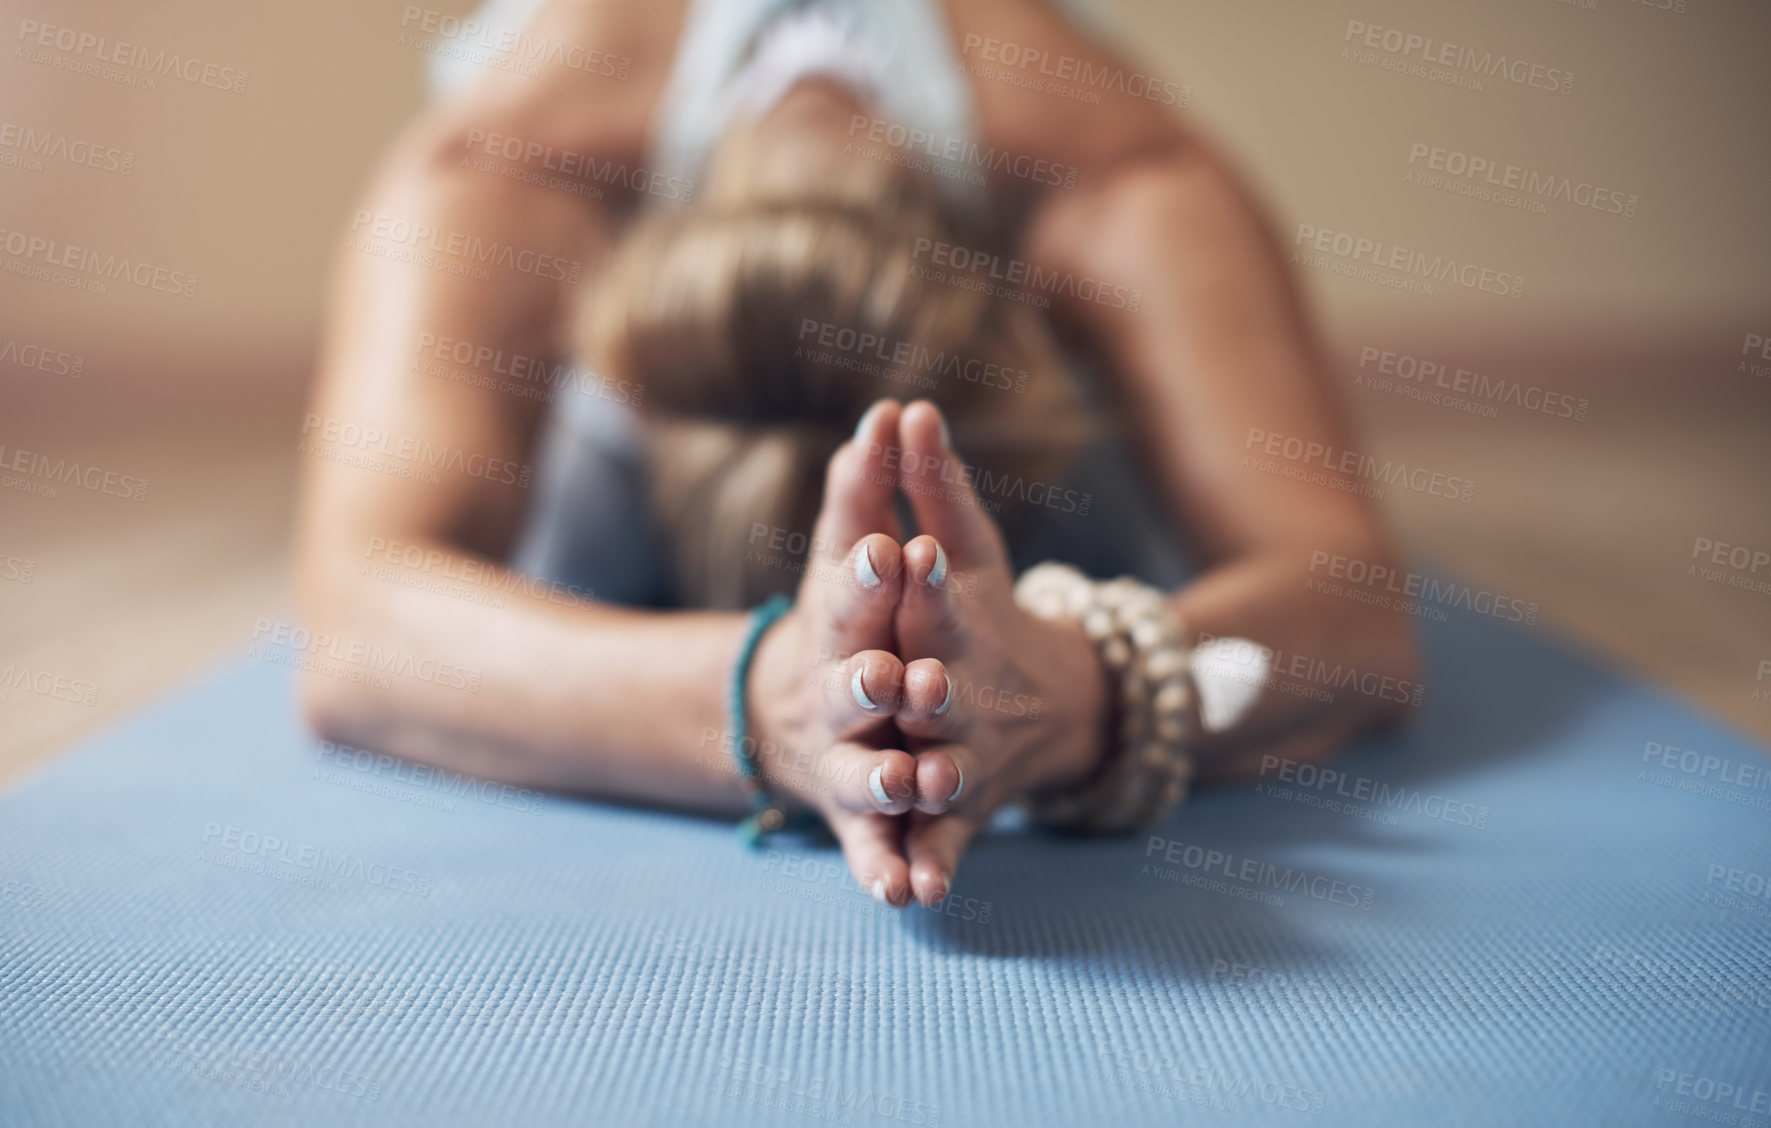 Buy stock photo Cropped shot of an unrecognizable woman holding a child's pose during an indoor yoga session alone